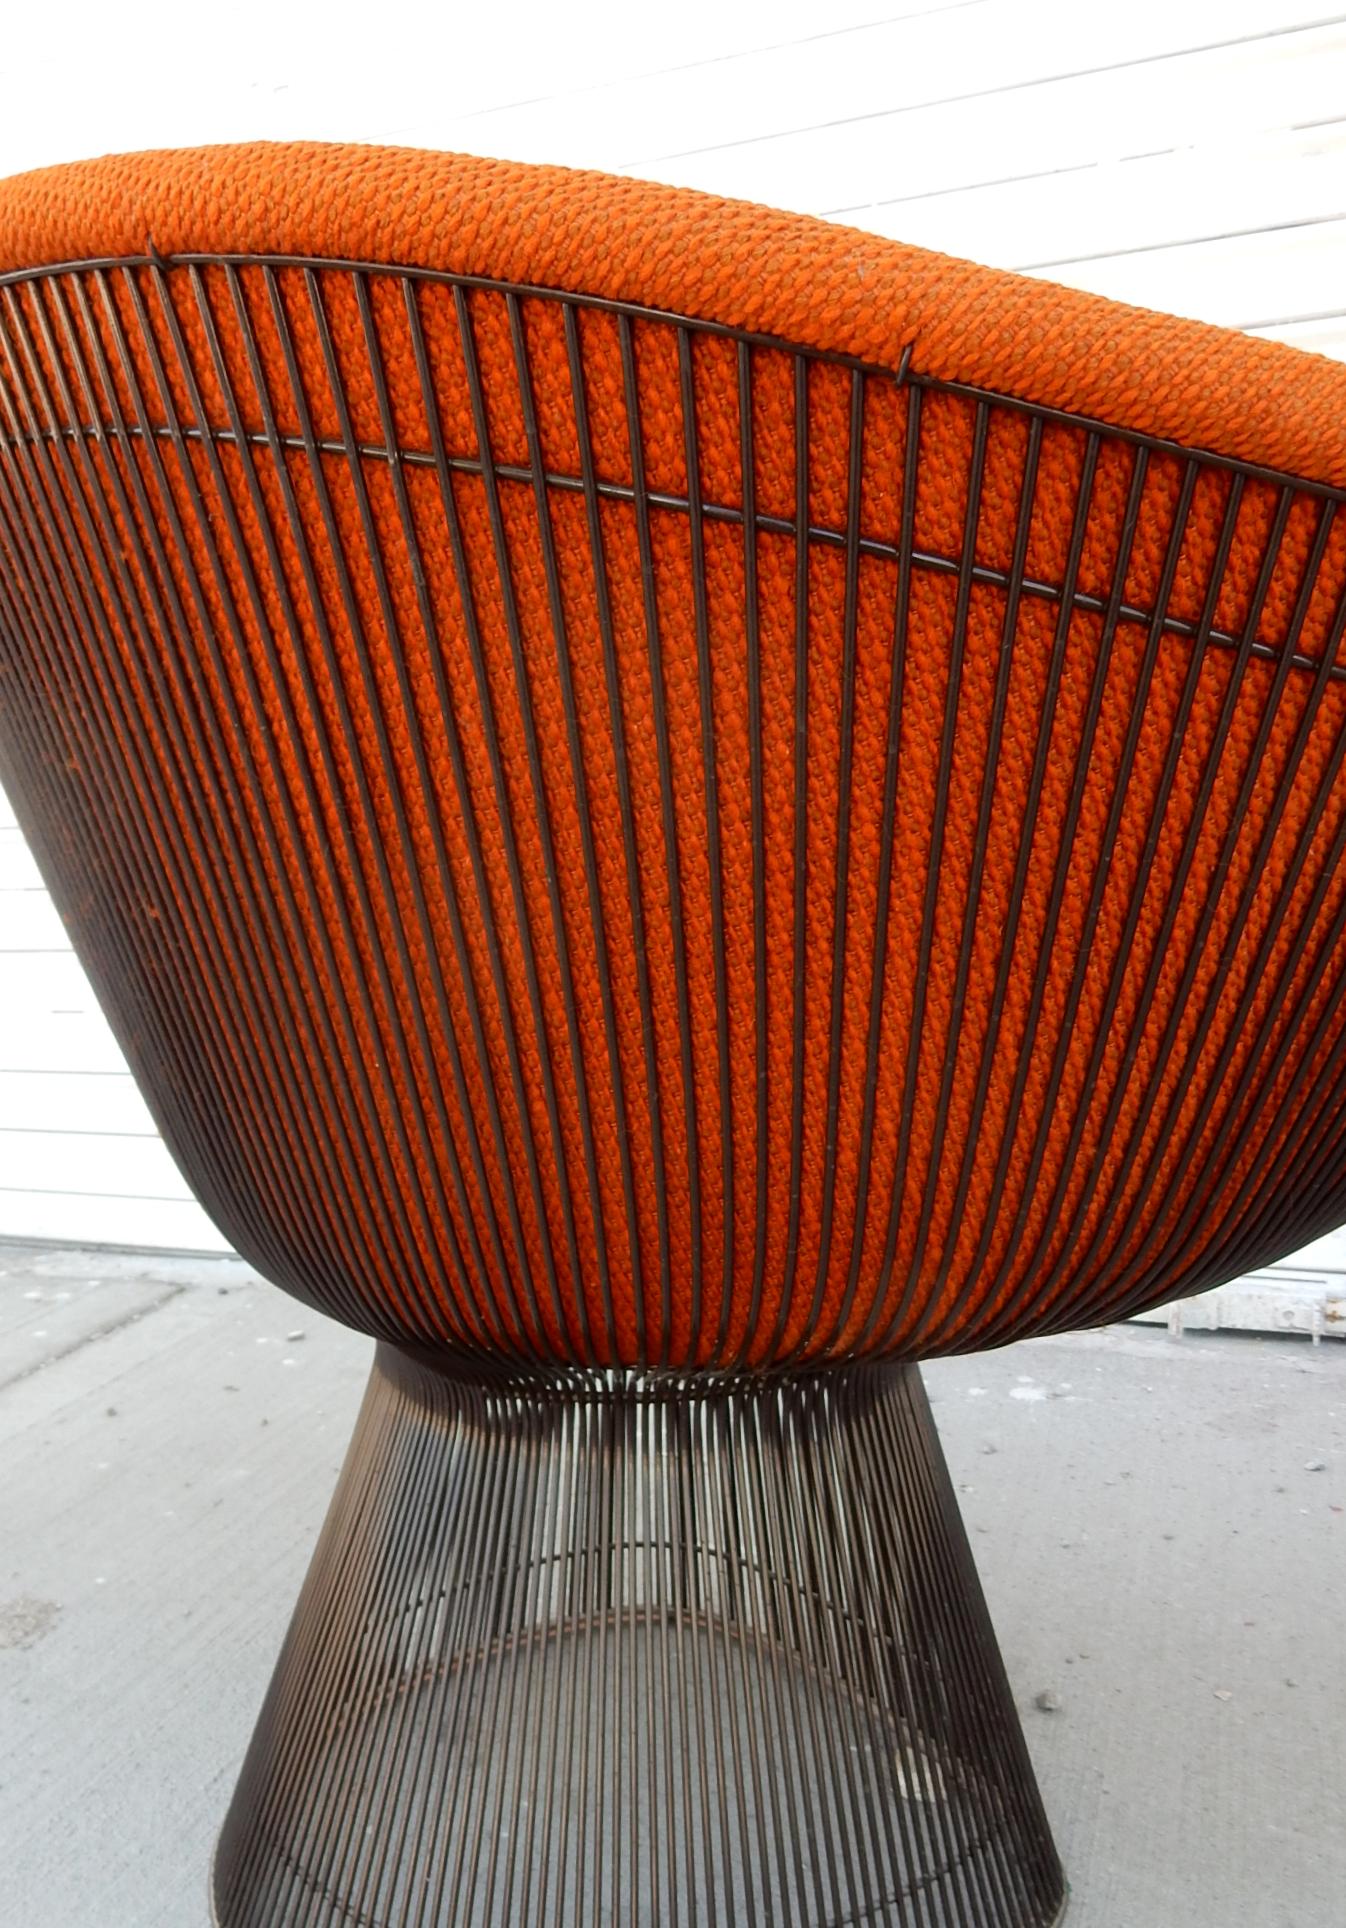 Vintage 1970's Warren Platner for Knoll Wire Lounge Chairs Original Knoll Fabric 2